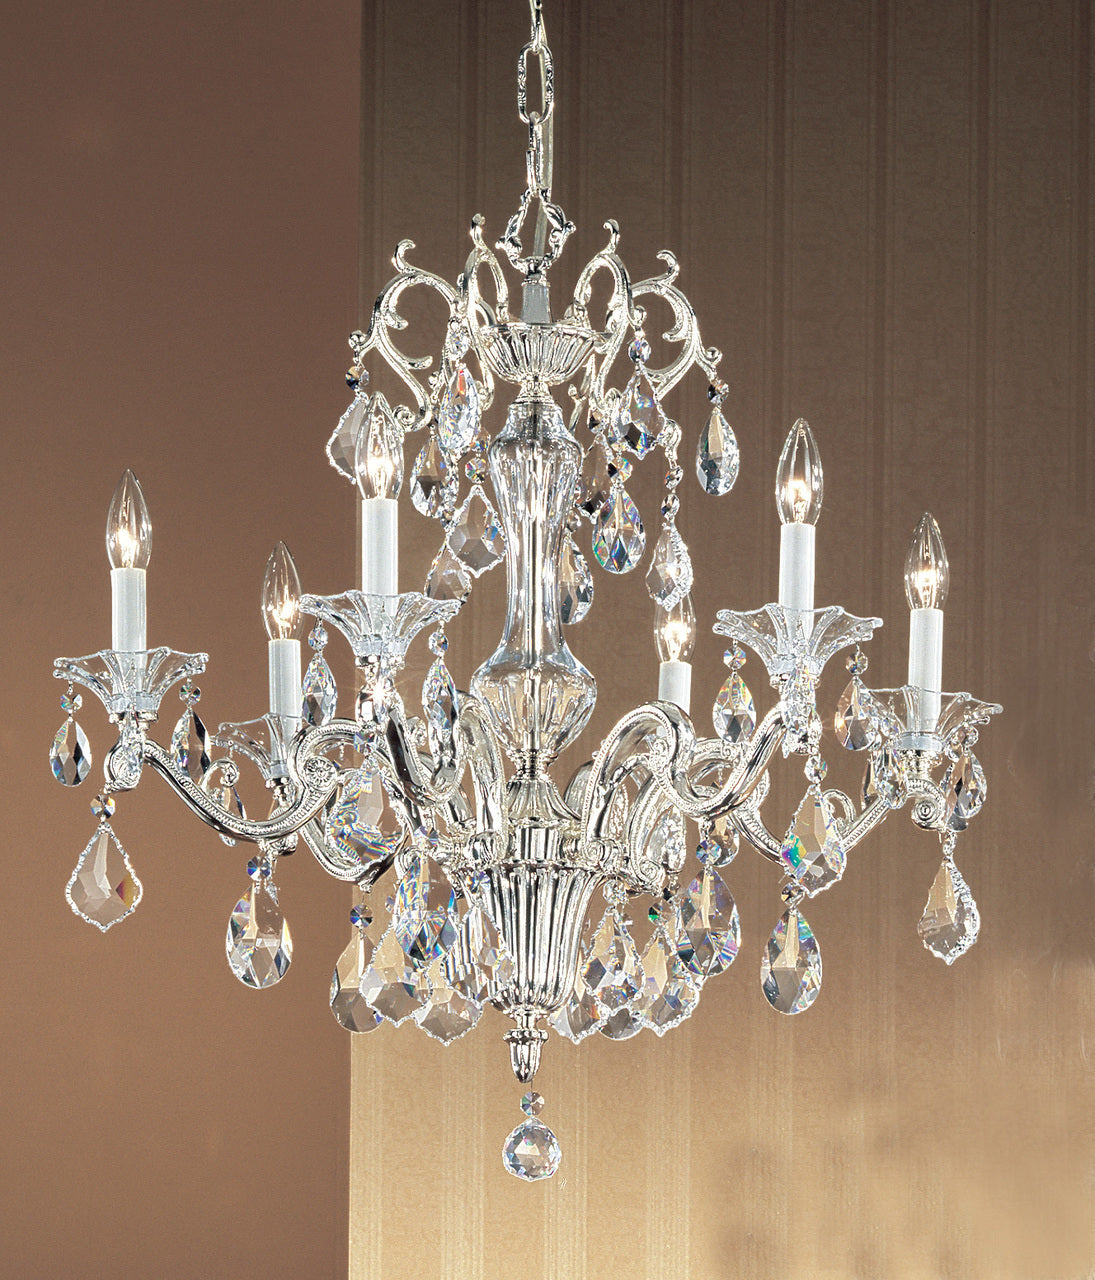 Classic Lighting 57106 SP S Via Firenze Crystal Chandelier in Silver (Imported from Spain)